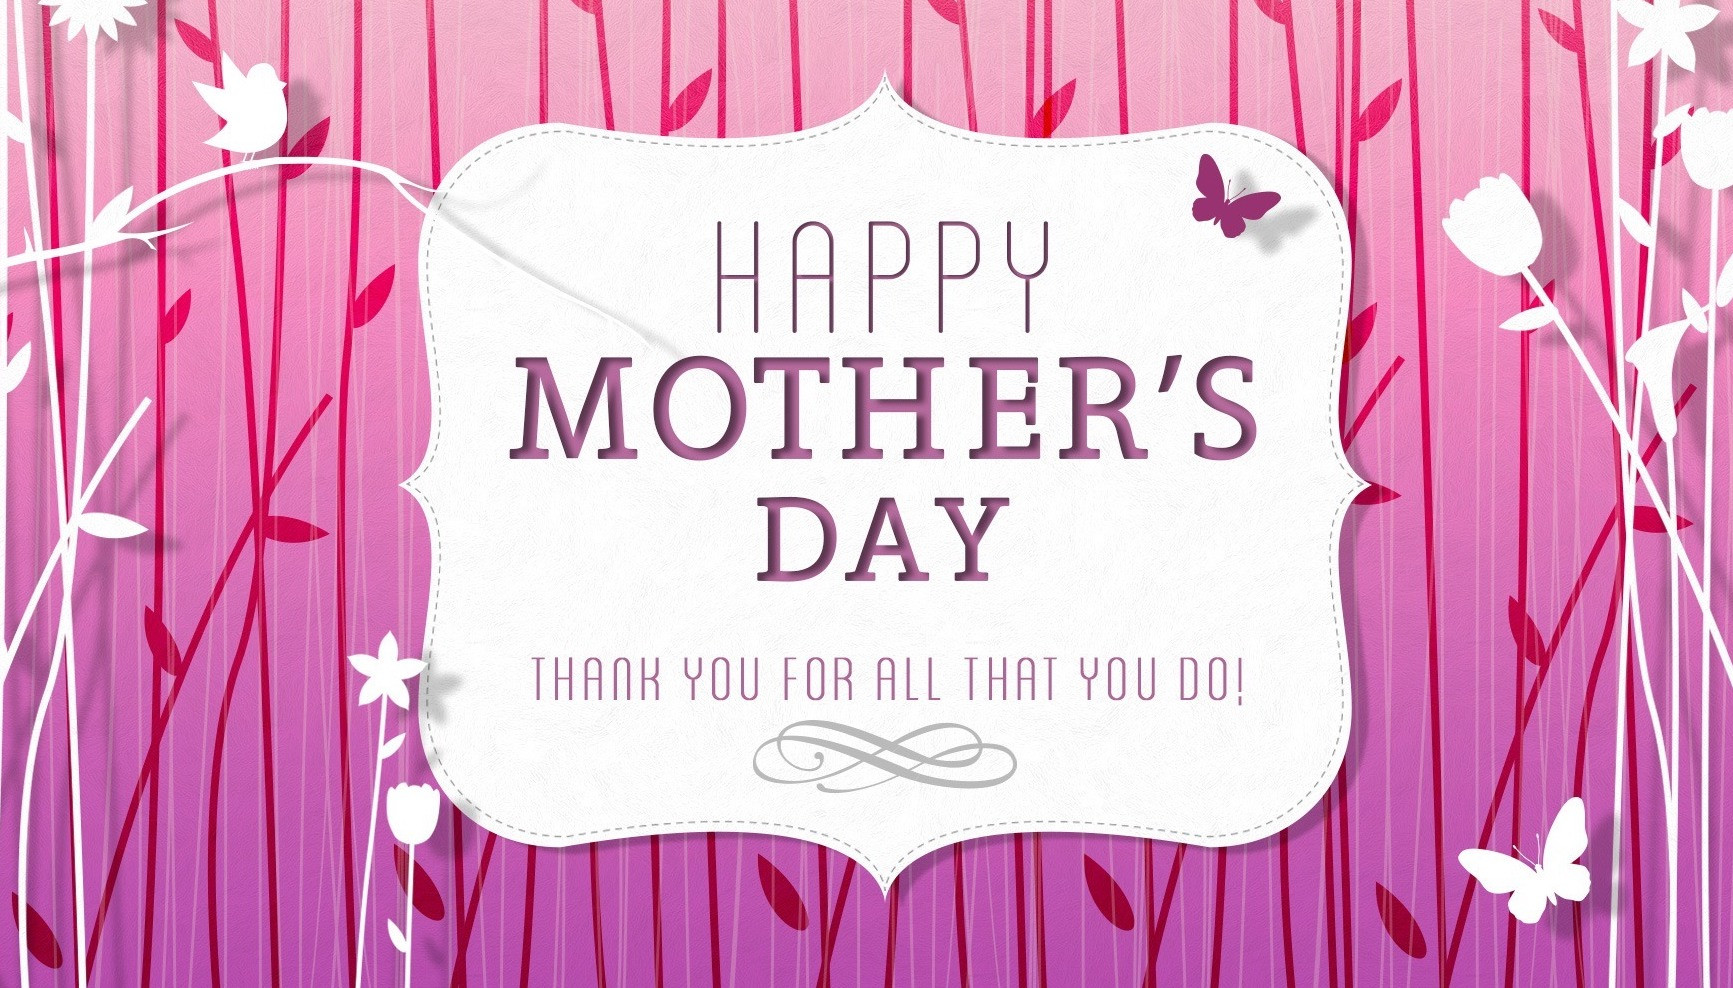 Happy Mothers Day Quotes And Images
 Happy Mother s Day Wishes Quotes Sayings 2017 Latest